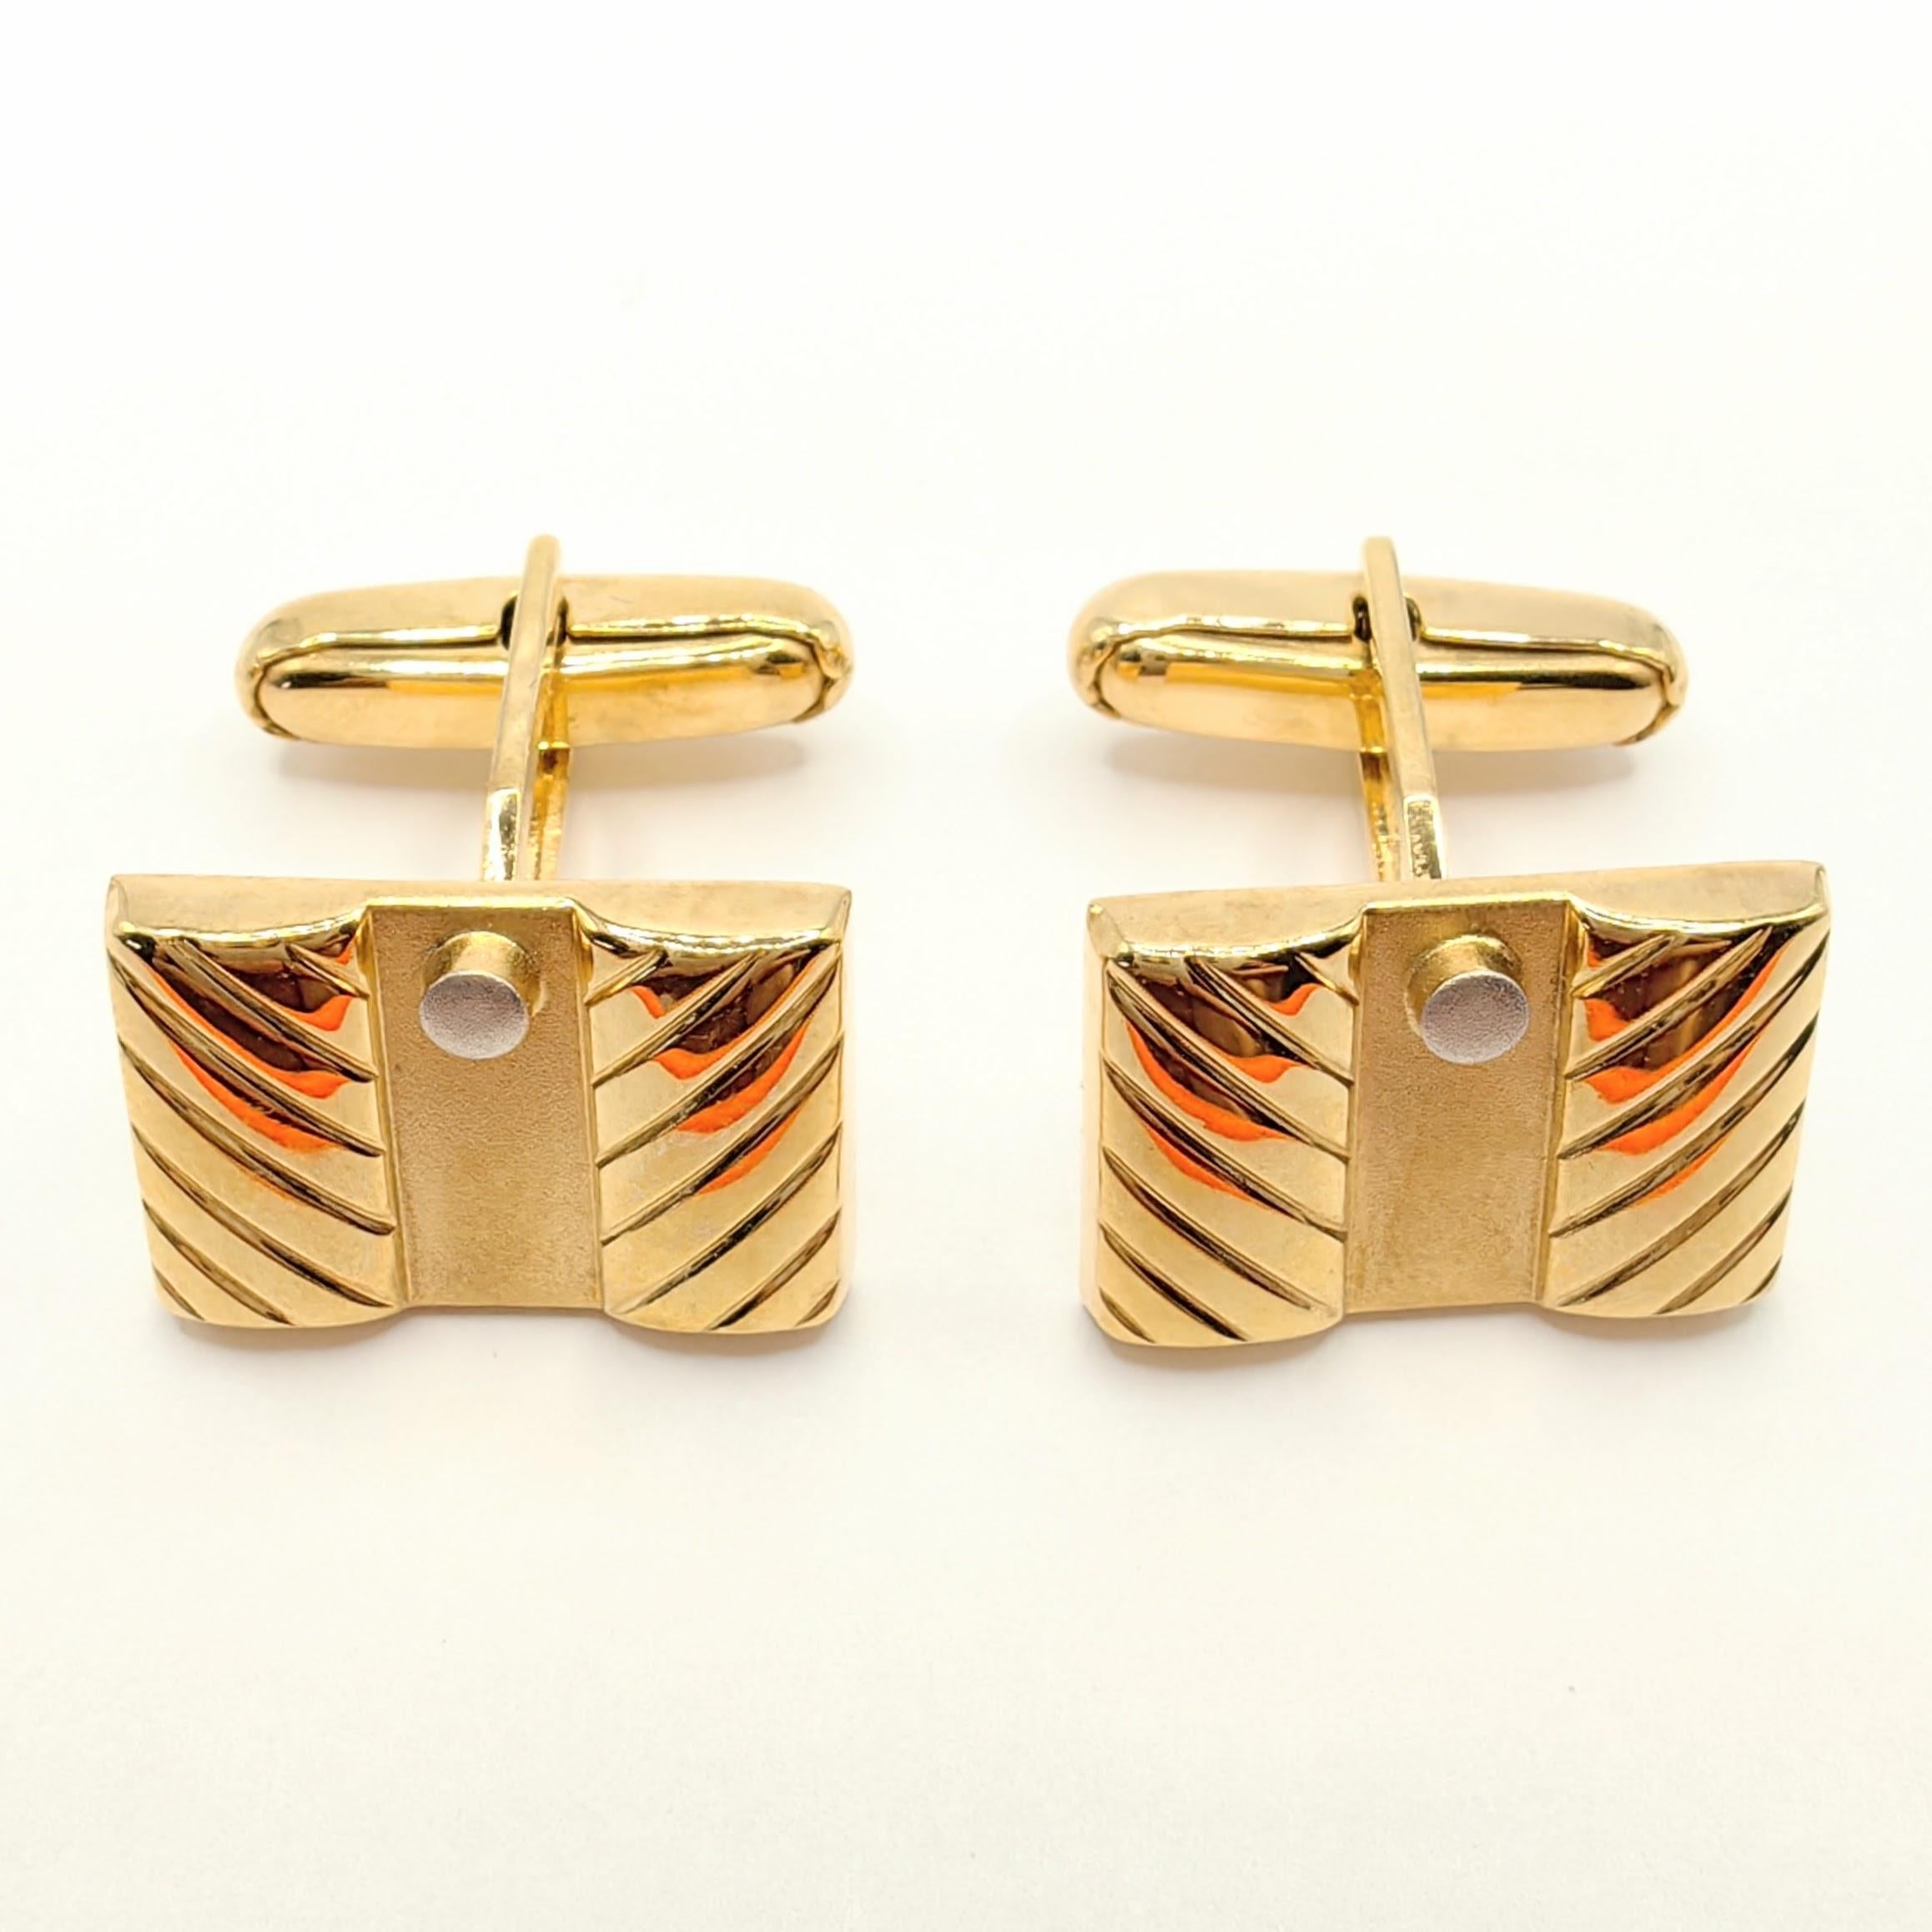 Introducing our Vintage Geometric Design Cufflinks in 18K Yellow & White Two-tone Gold, a stunning accessory that combines classic elegance with a modern touch.

These exquisite cufflinks feature a captivating geometric design that is sure to